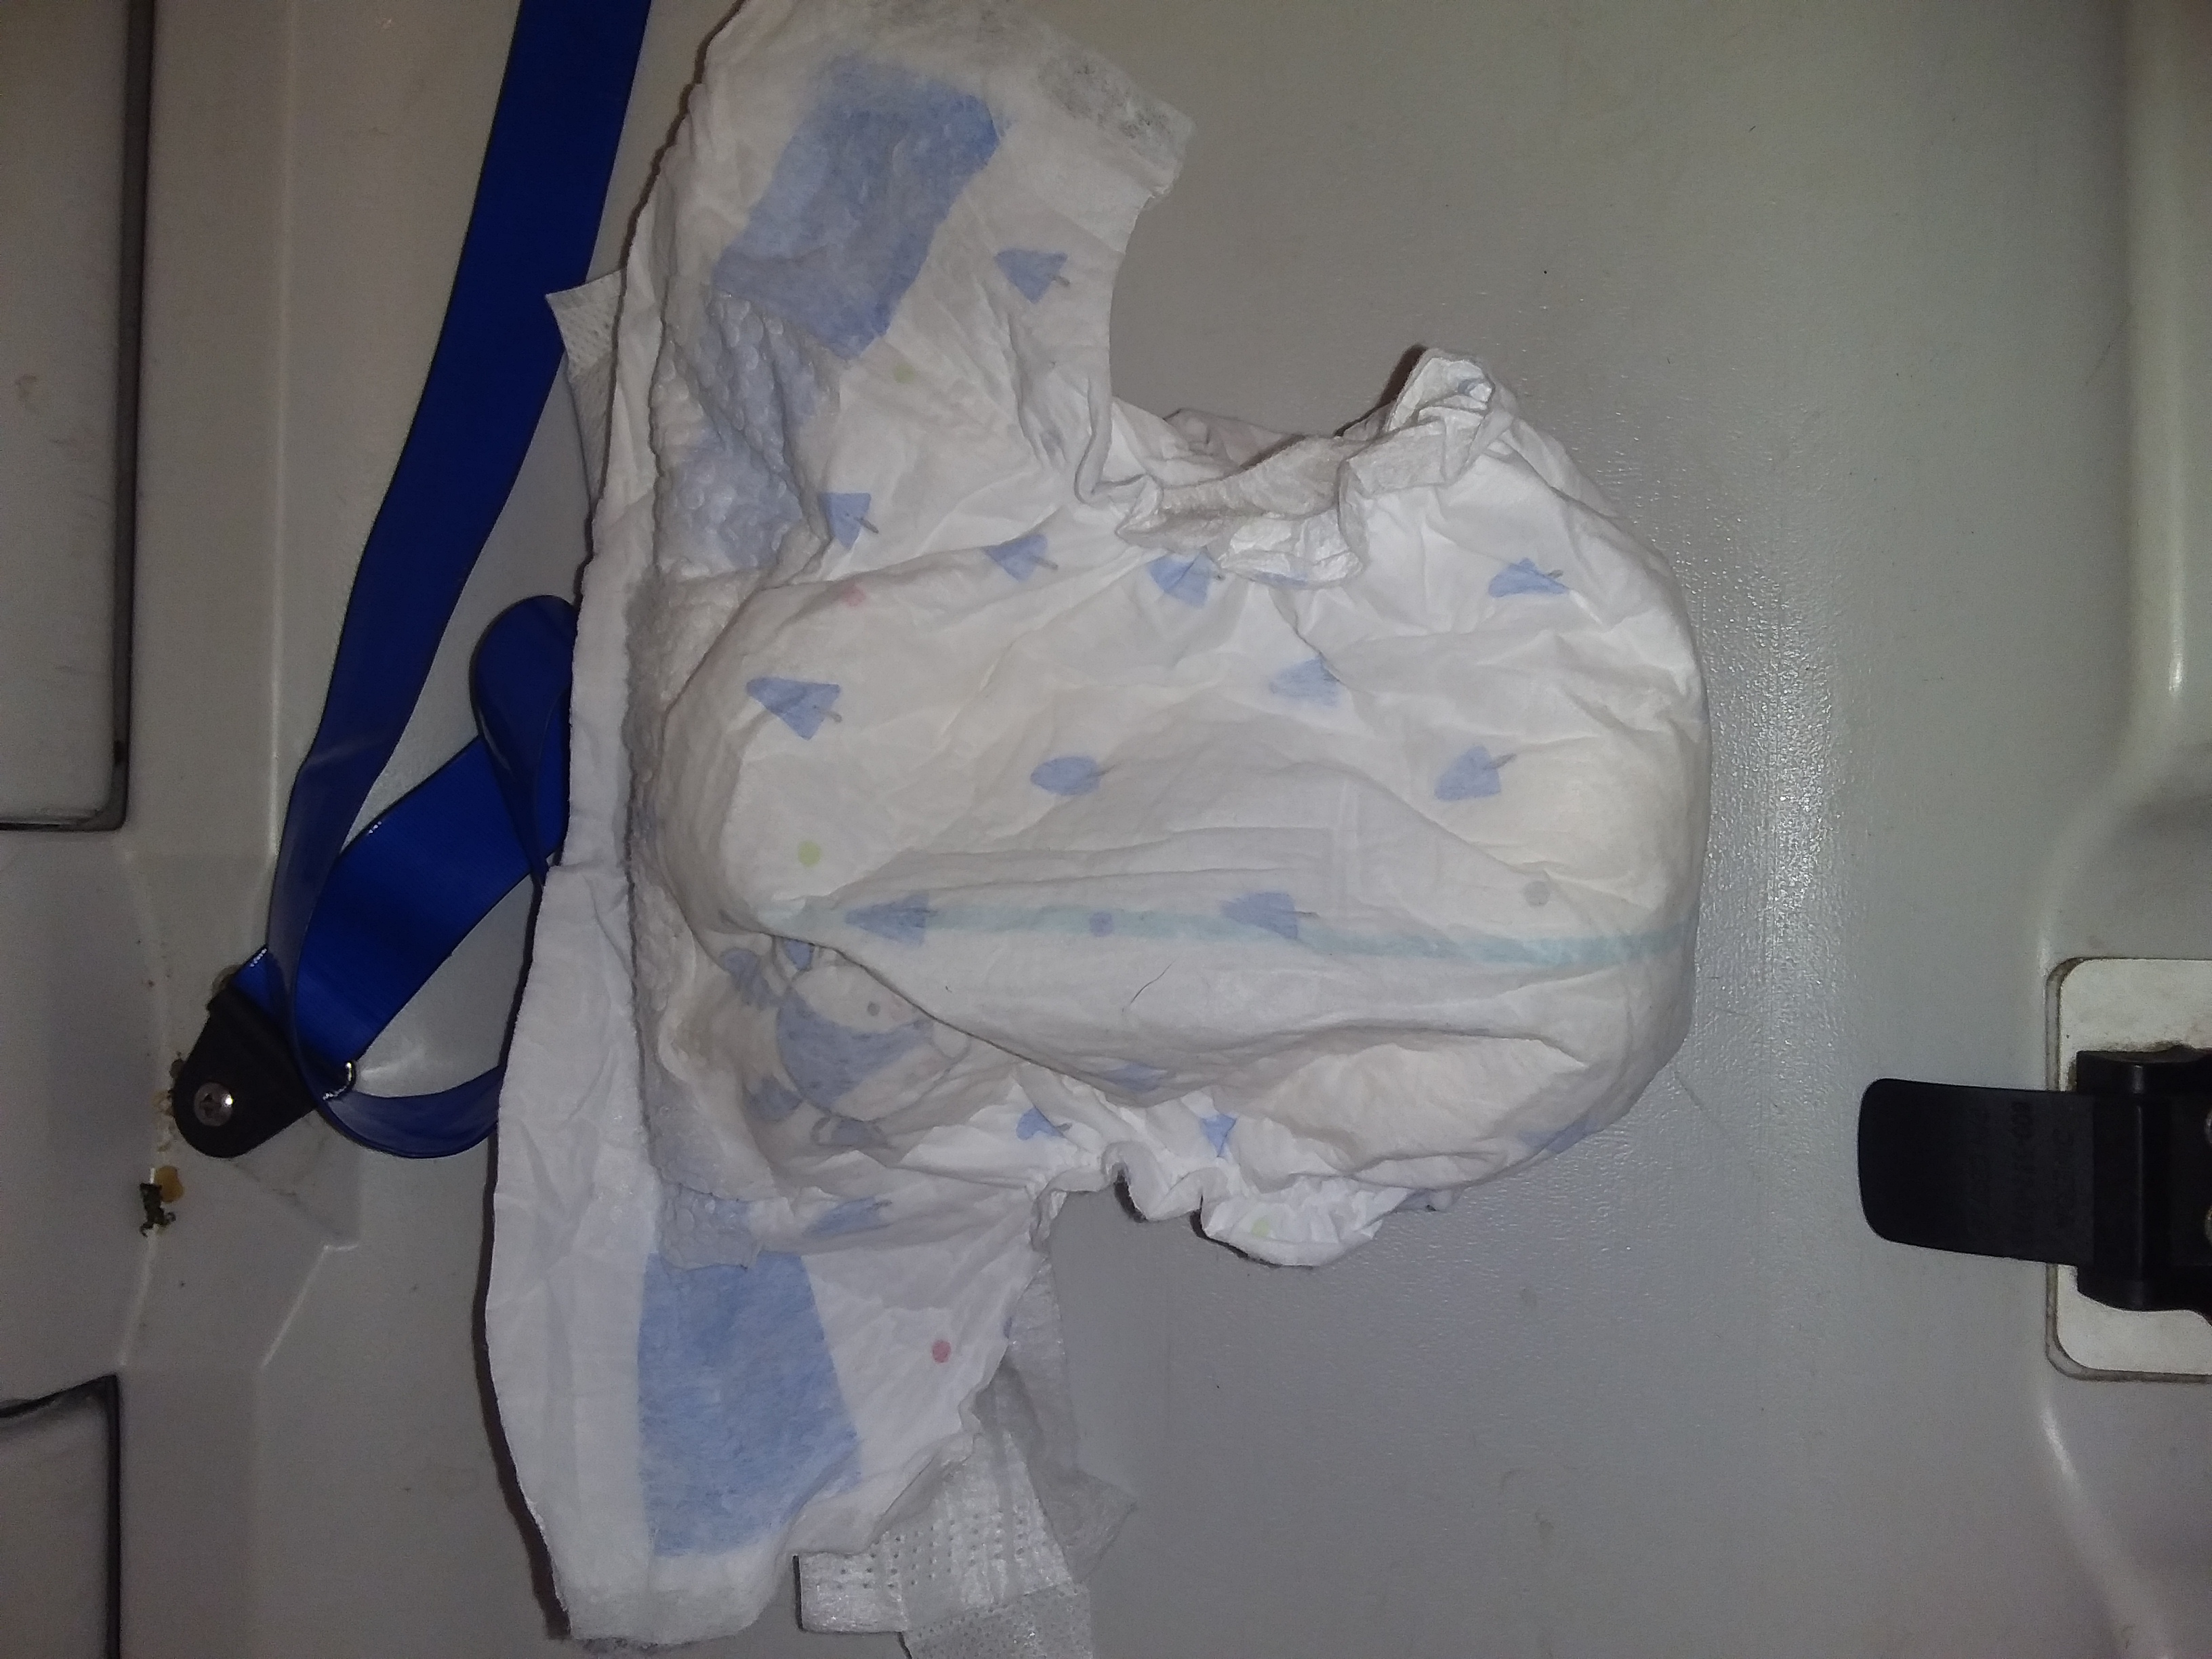 Diapers I found